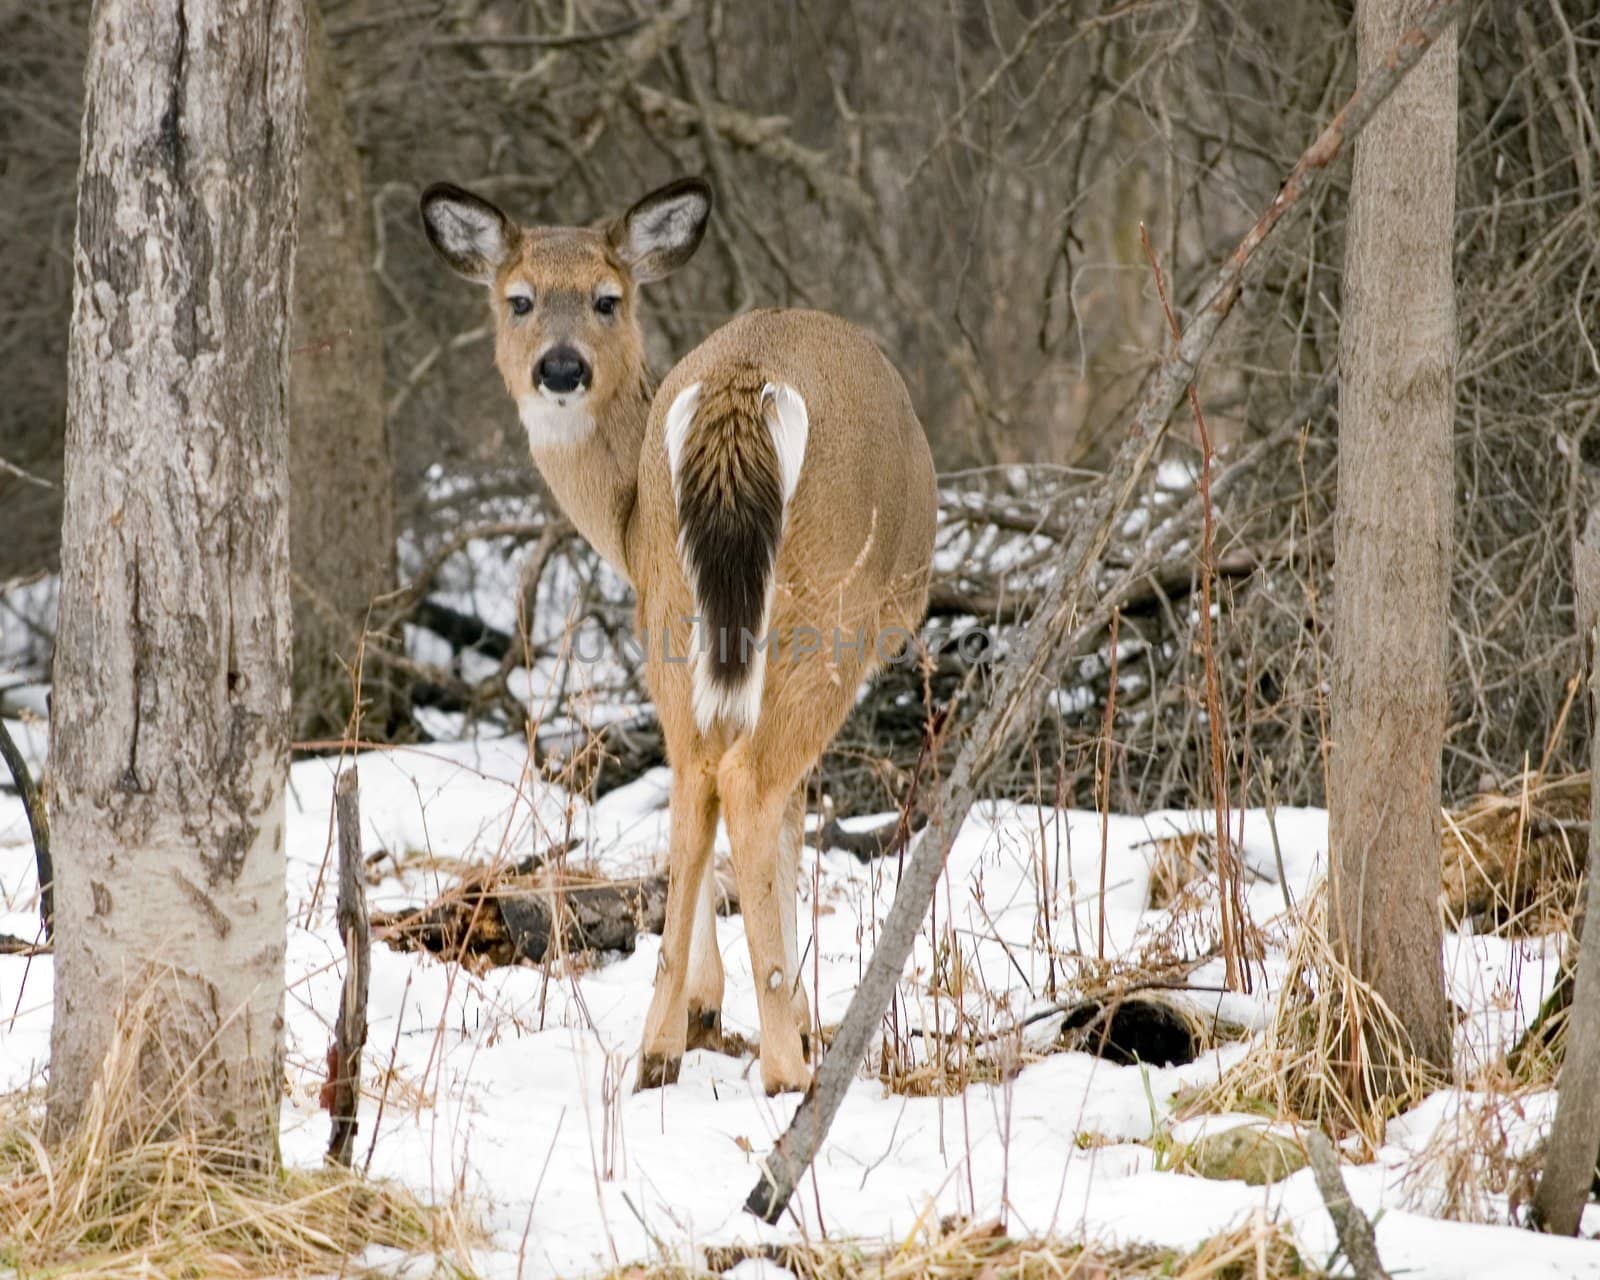 A whitetail deer doe looking back from the woods in winter snow.